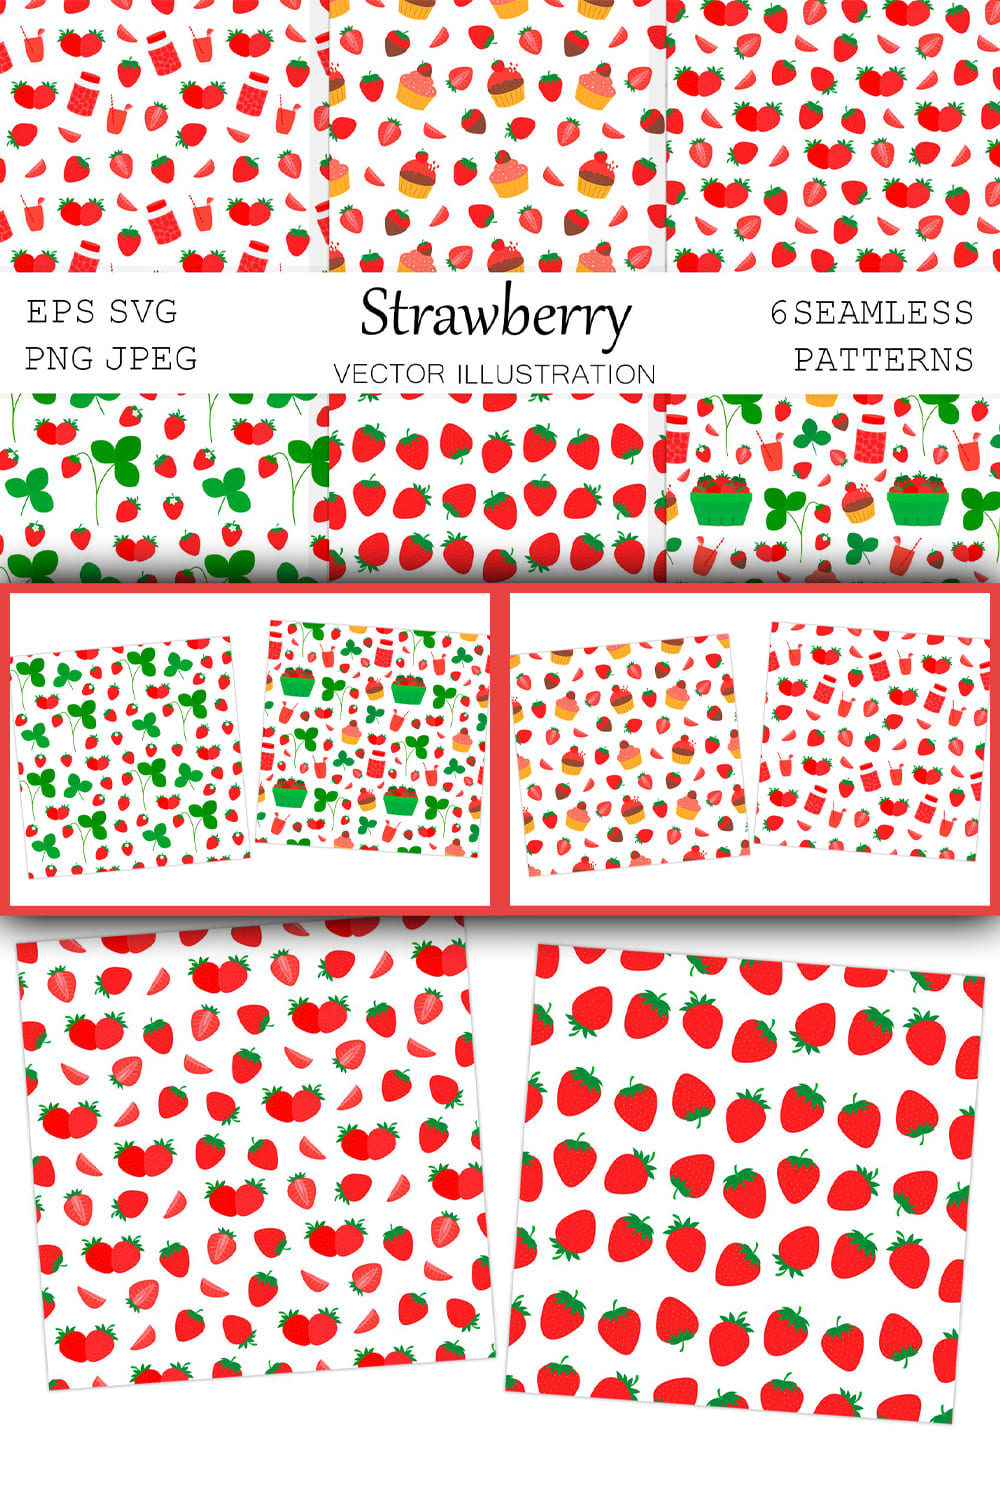 Strawberry Seamless Pattern - pinterest image preview.